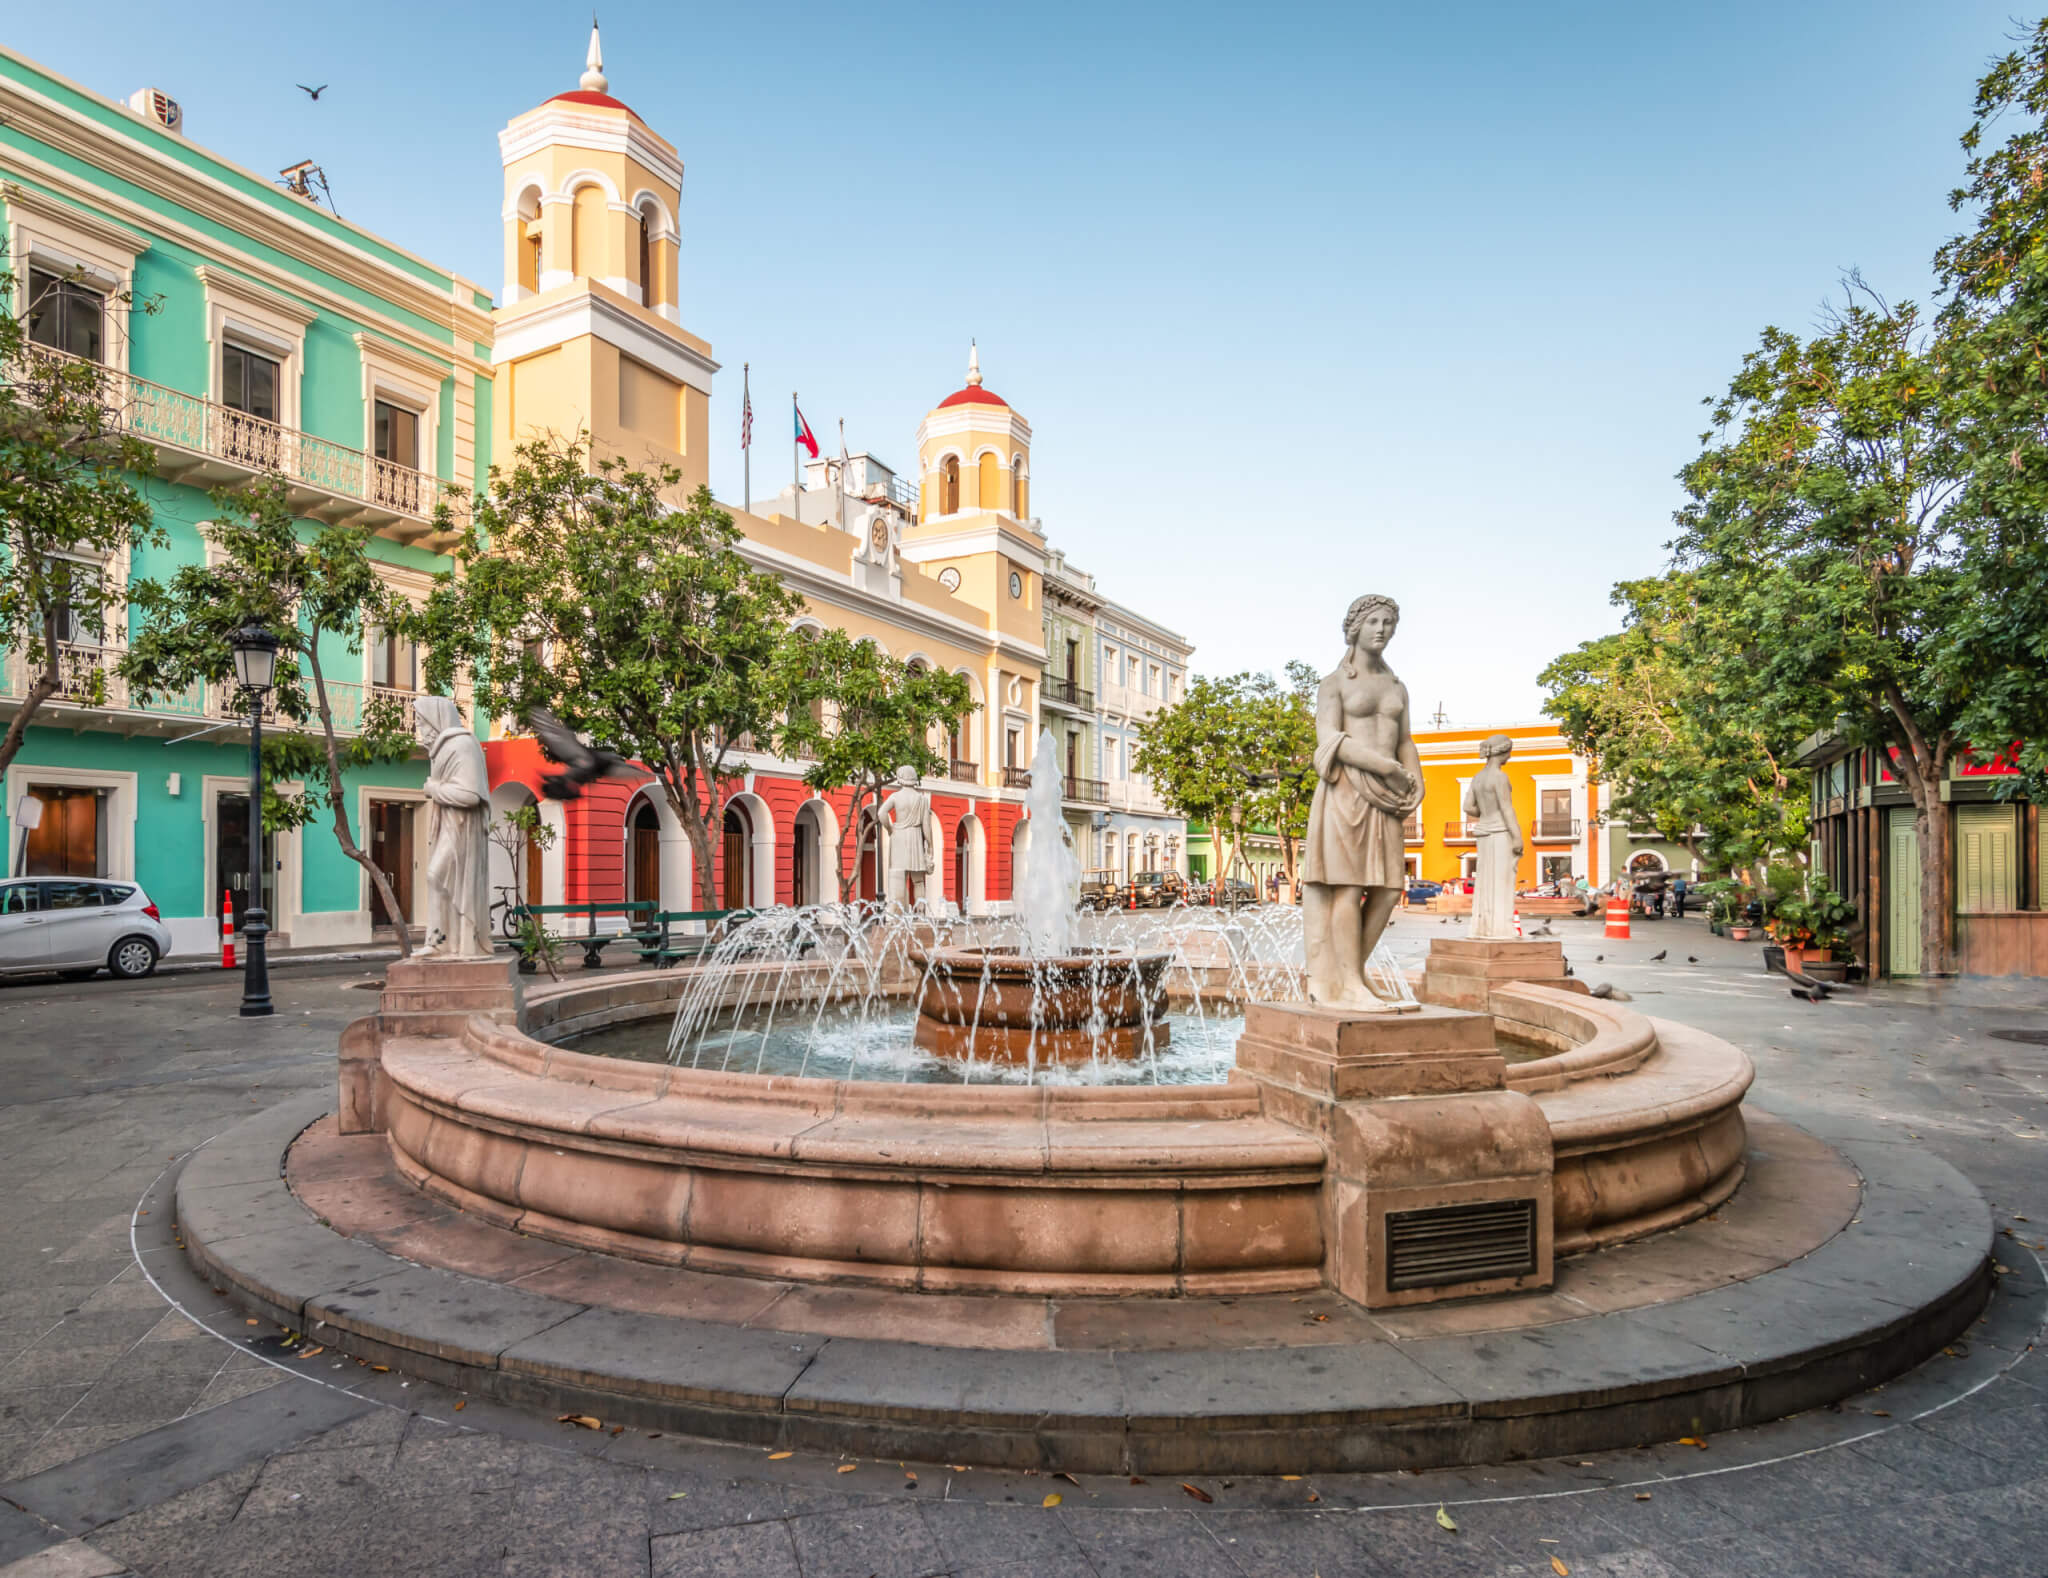 Plaza de Armas, town square with fountain in the city centre of Old San Juan, Puerto Rico.